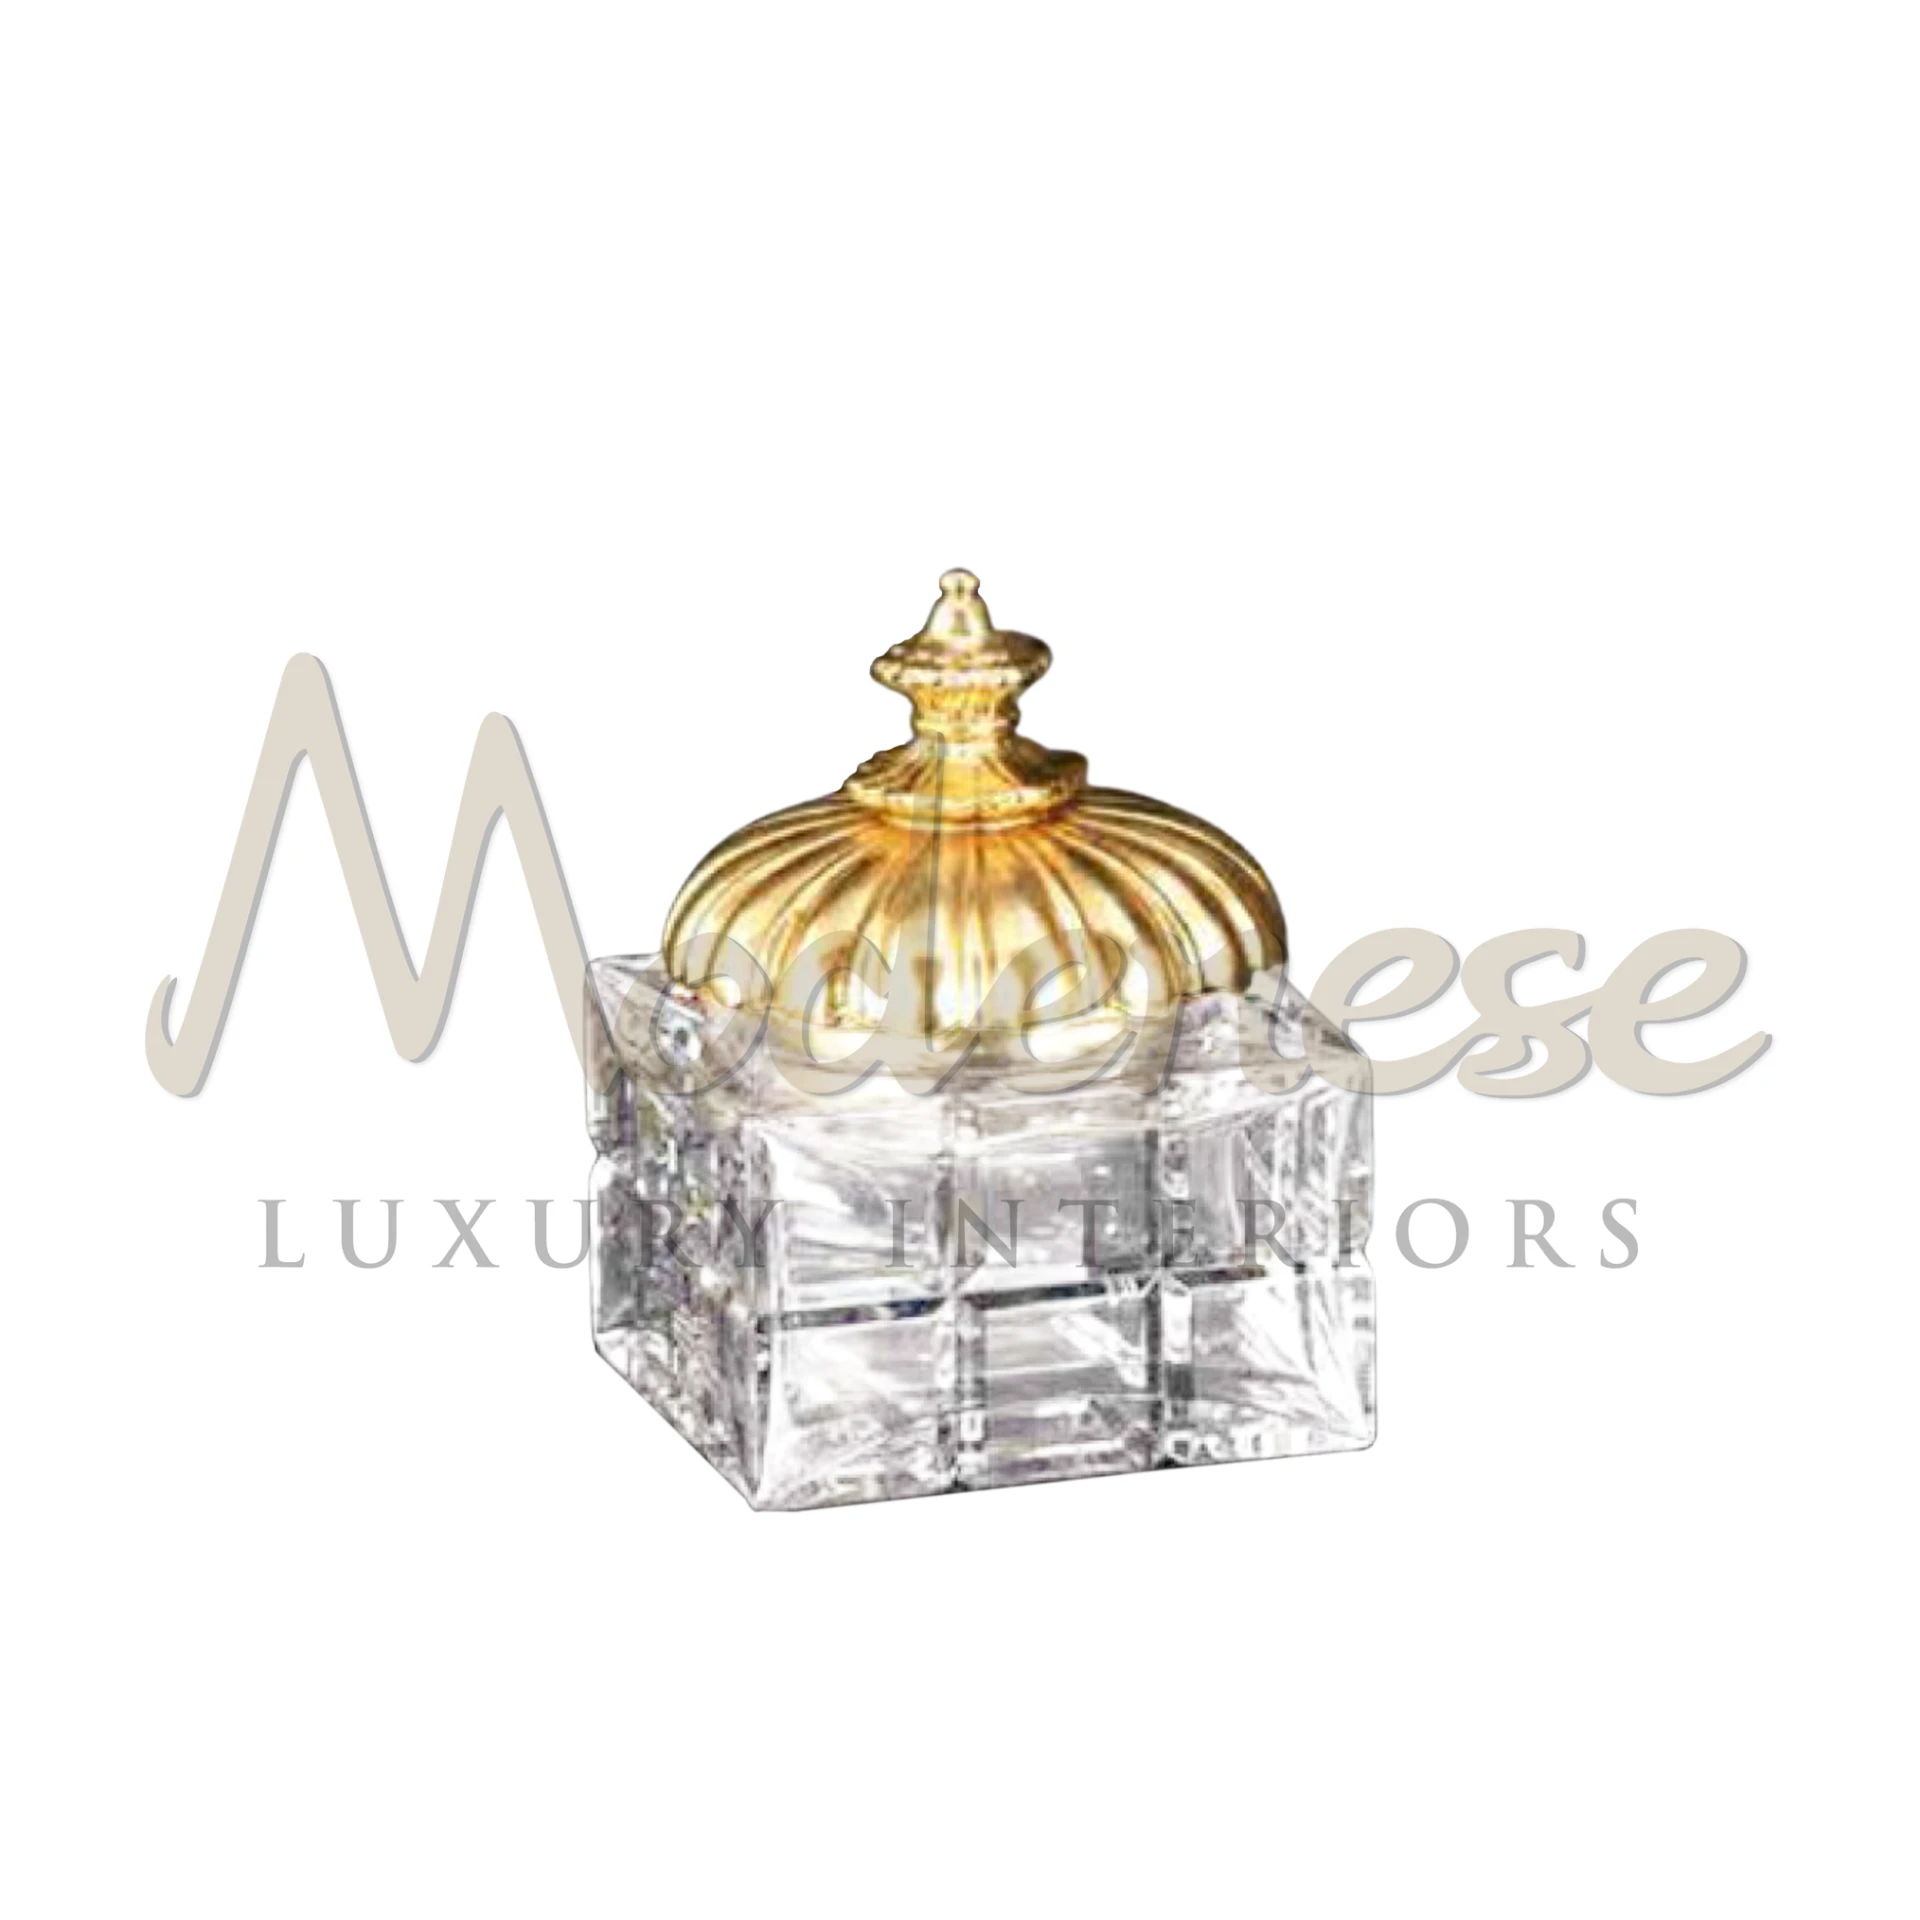 Royal style glass box with intricate embossed patterns, showcasing opulent elegance for luxury interior designs.